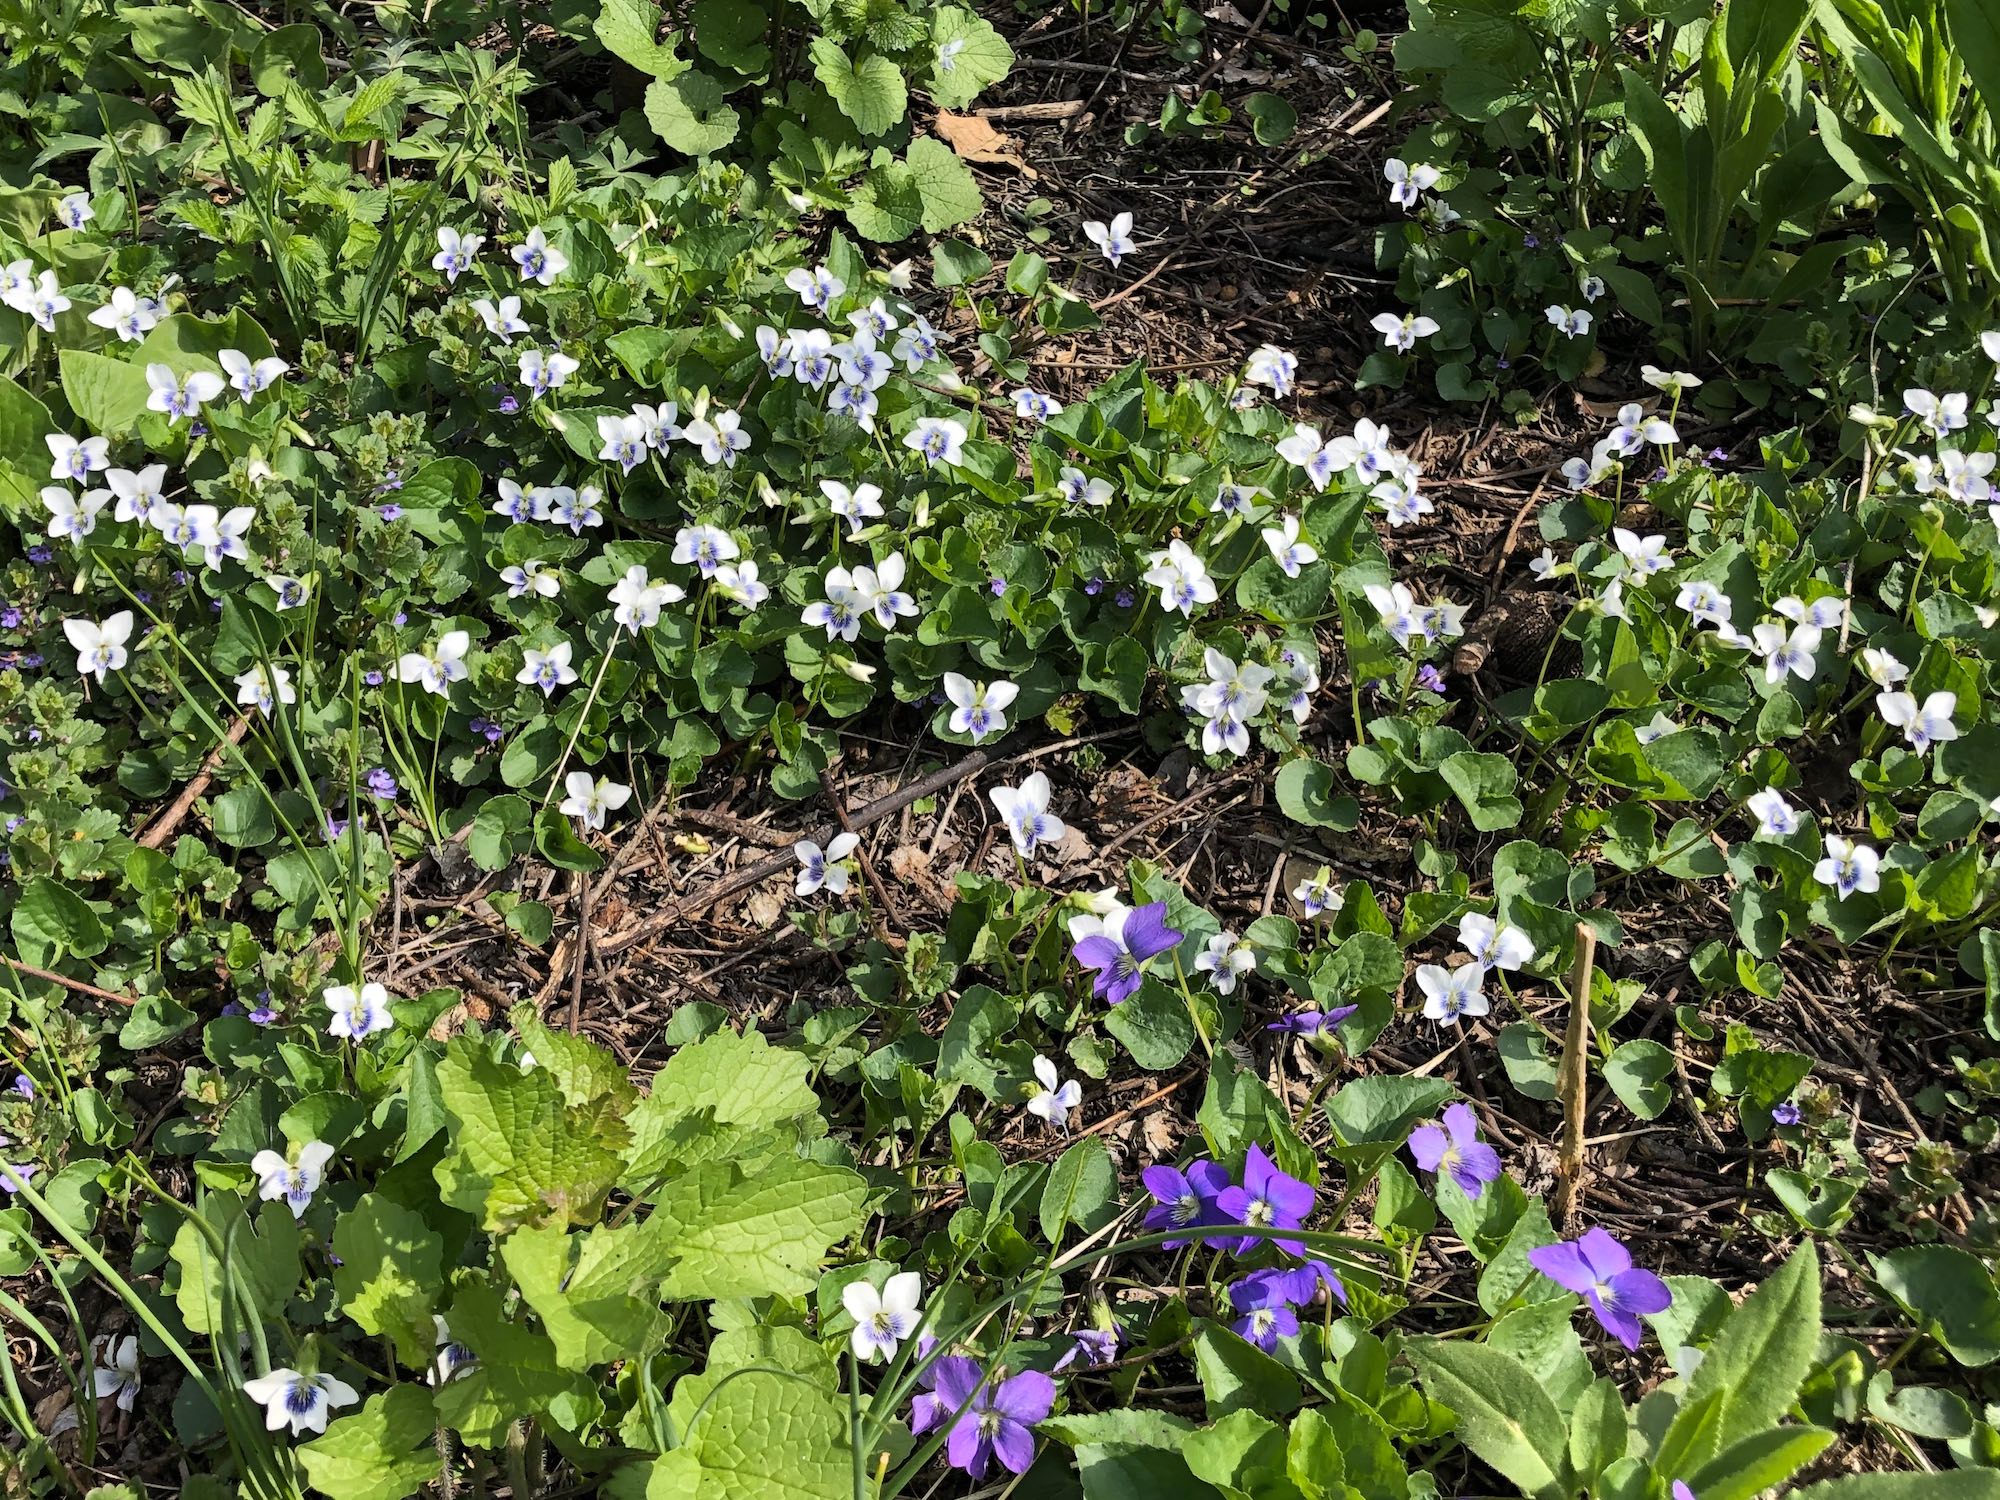 Wood Violets near the Duck Pond on April 25, 2019.